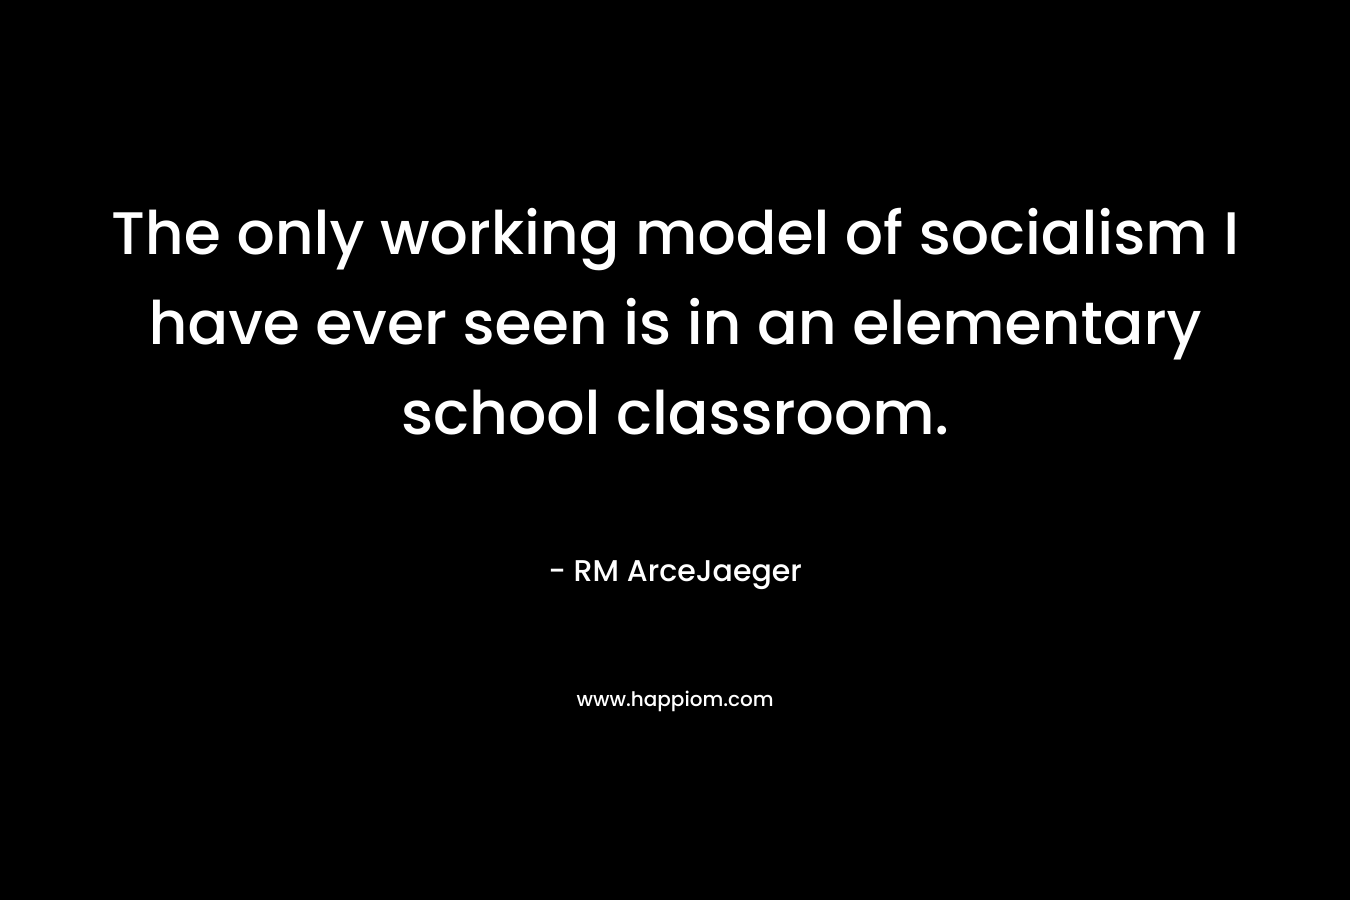 The only working model of socialism I have ever seen is in an elementary school classroom. – RM ArceJaeger